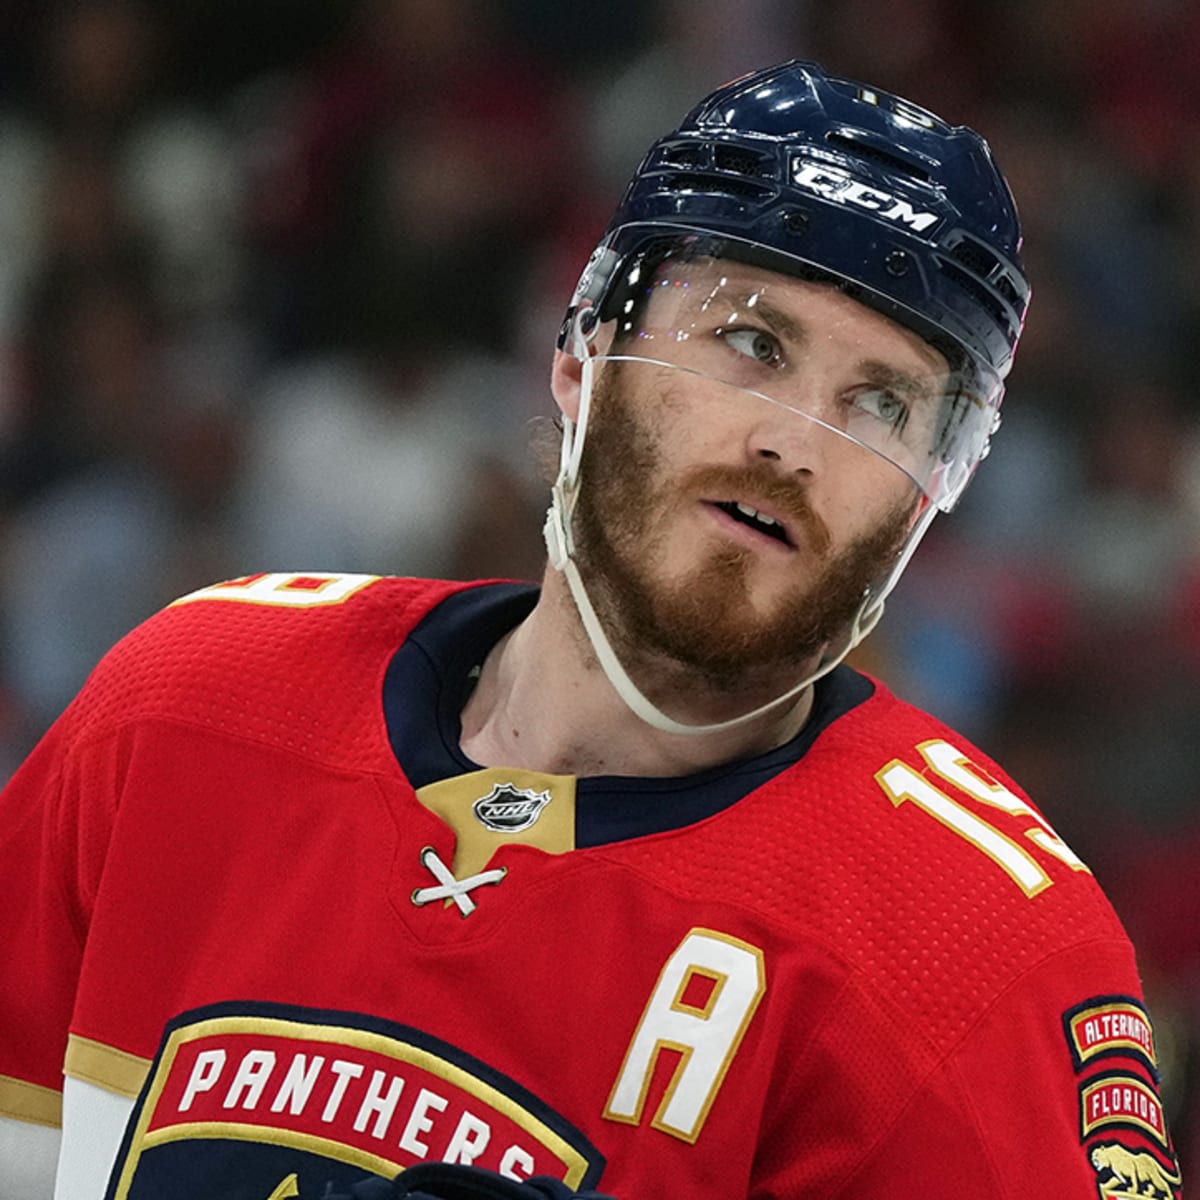 The new Florida Panthers logo has reportedly been leaked - NBC Sports